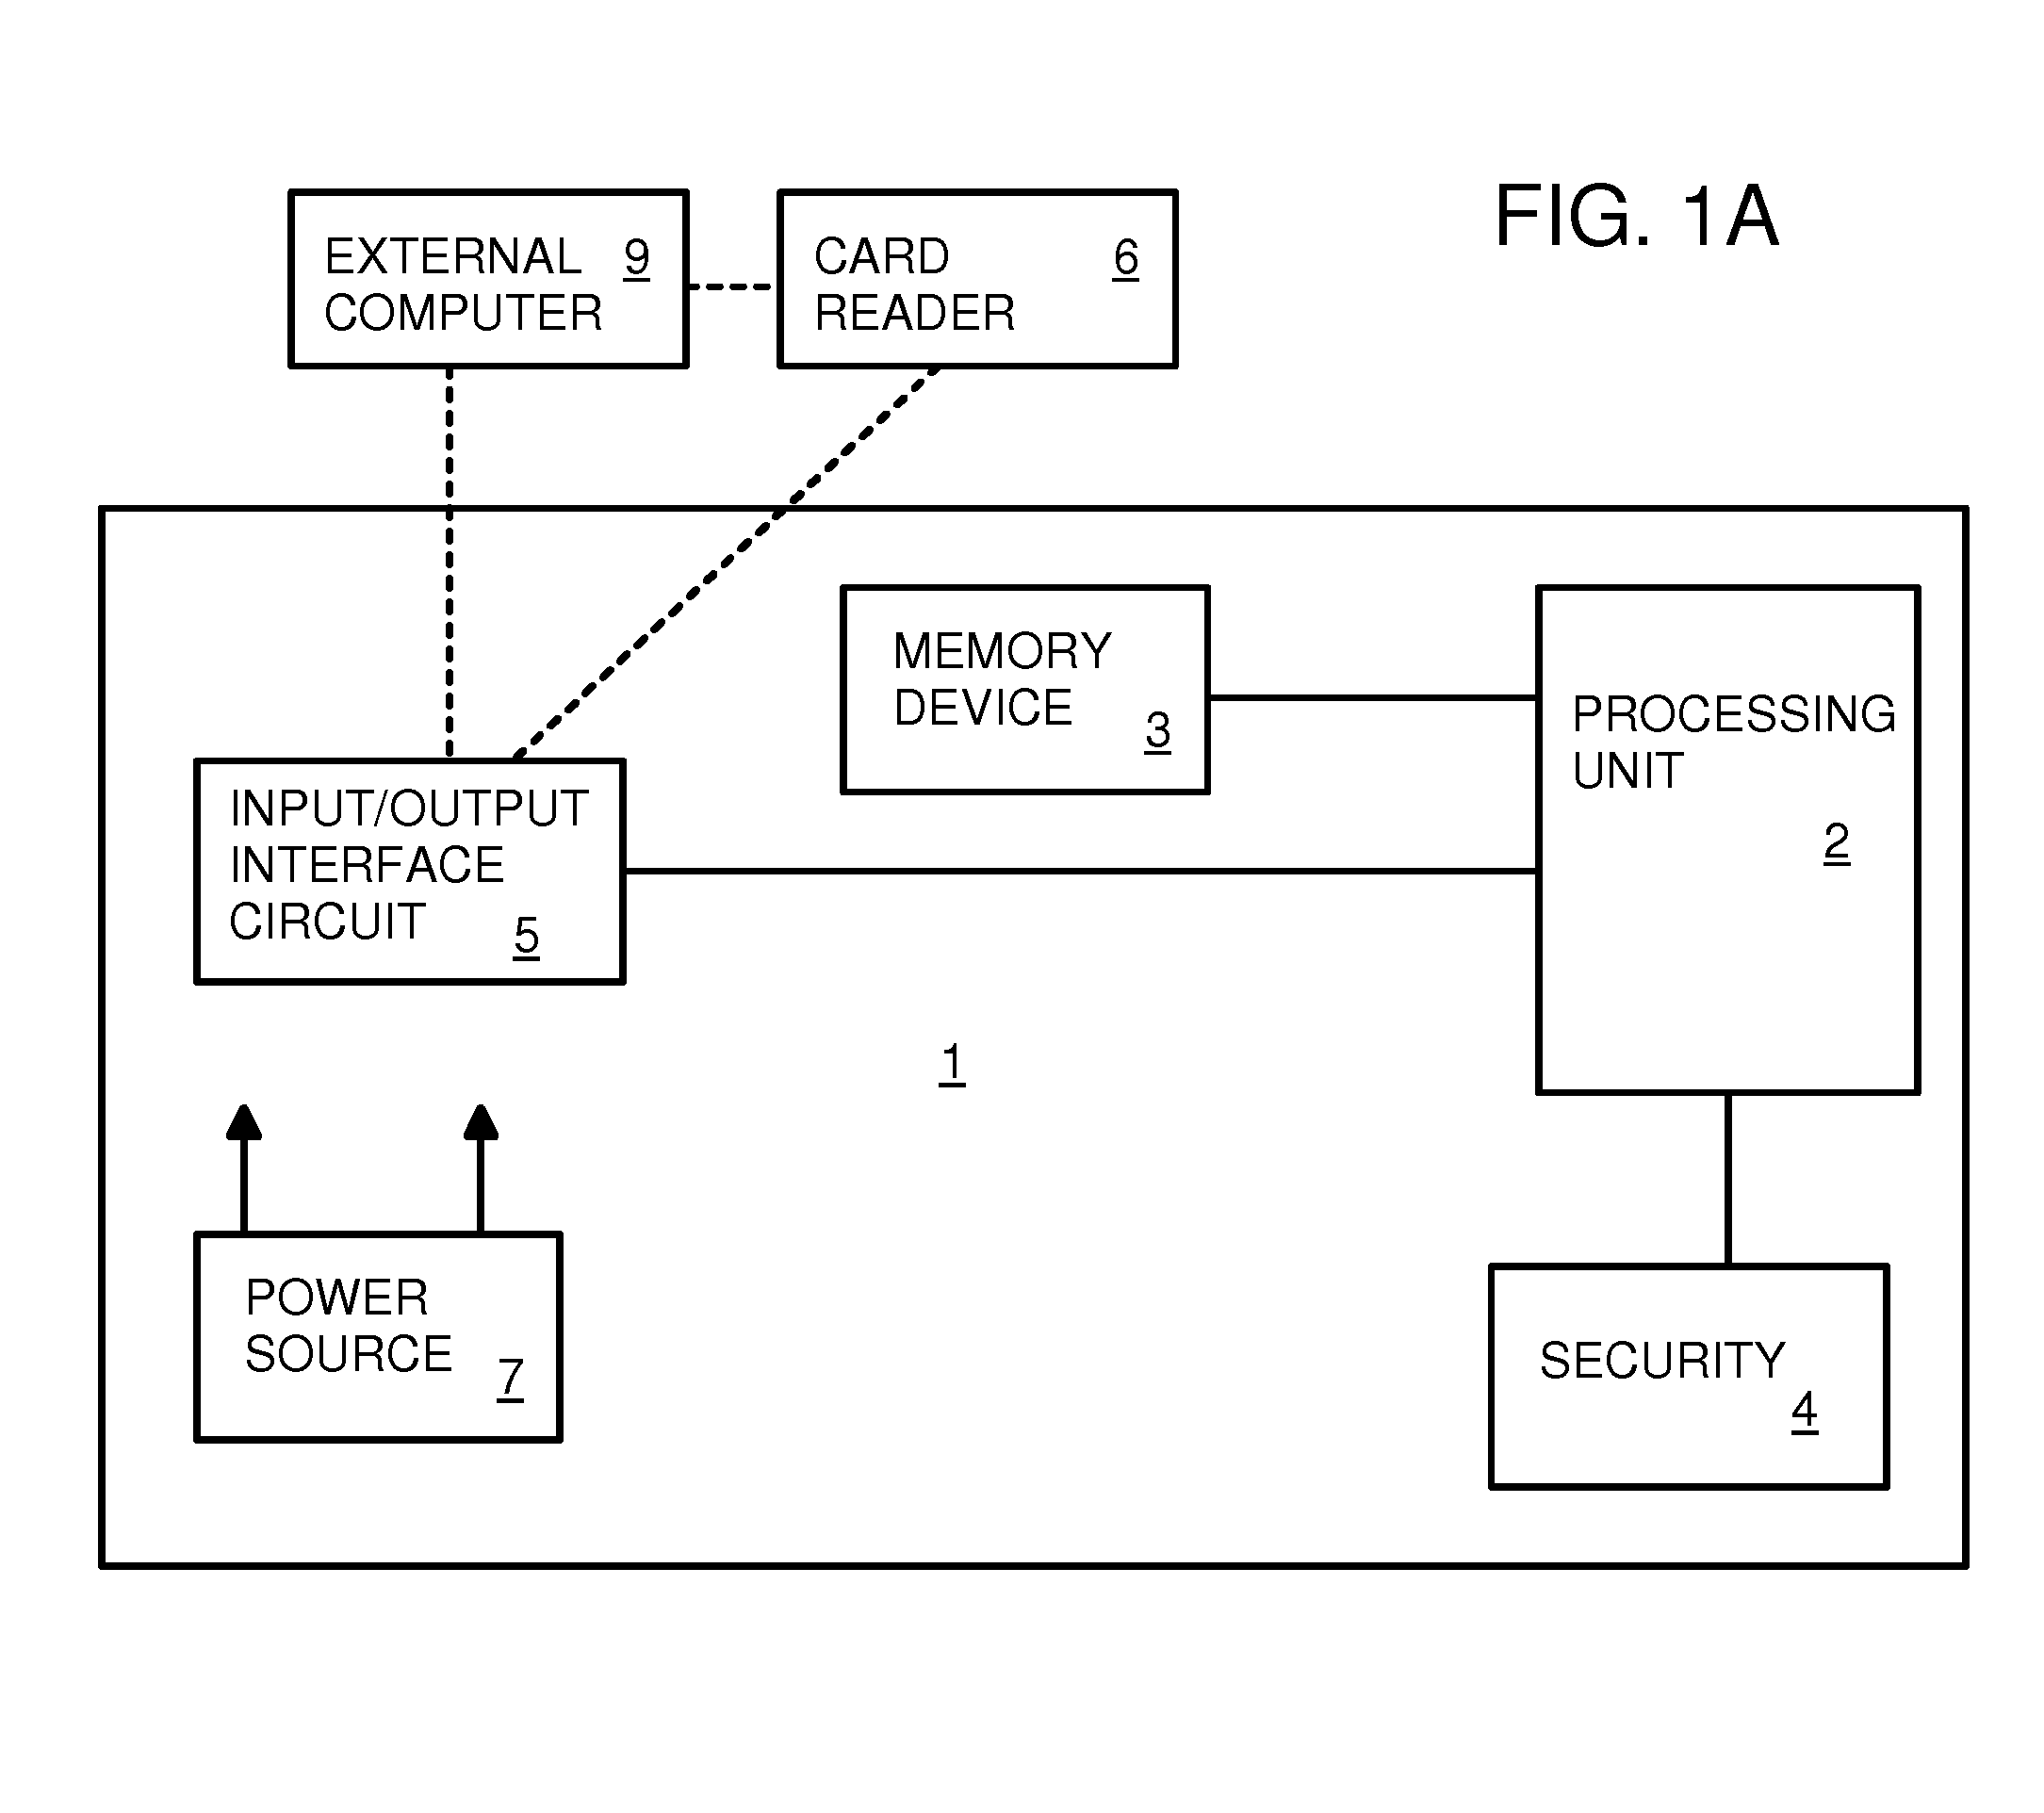 USB-attached-SCSI flash-memory system with additional command, status, and control pipes to a smart-storage switch